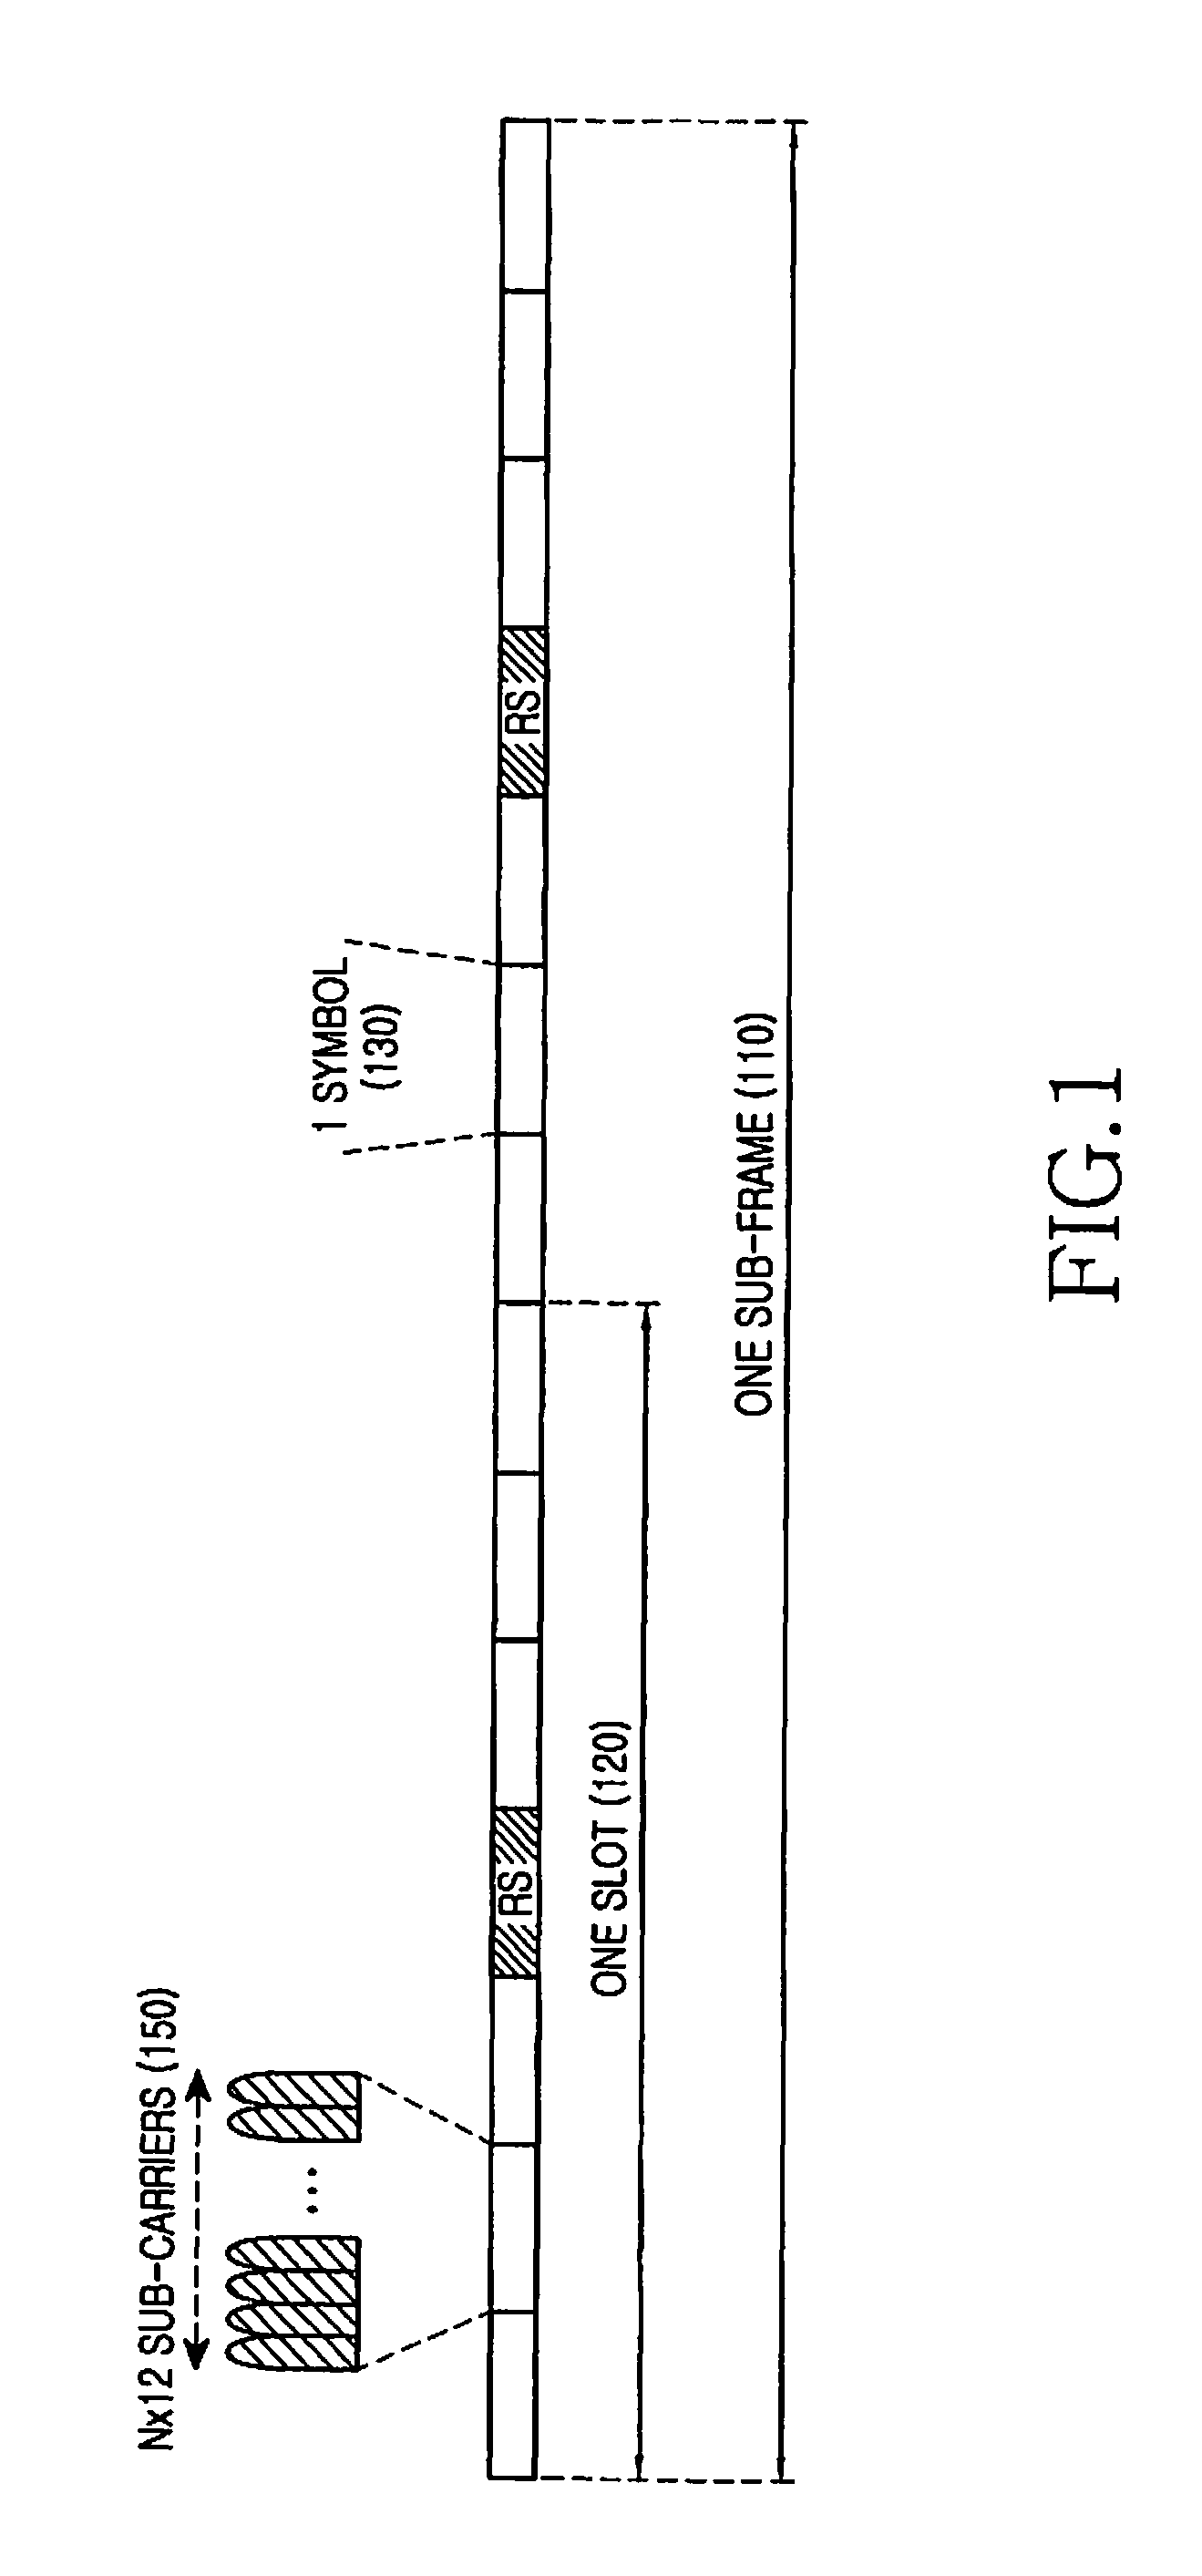 Methods and apparatus for sequence hopping in single-carrier frequency division multiple access (SC-FDMA) communication systems